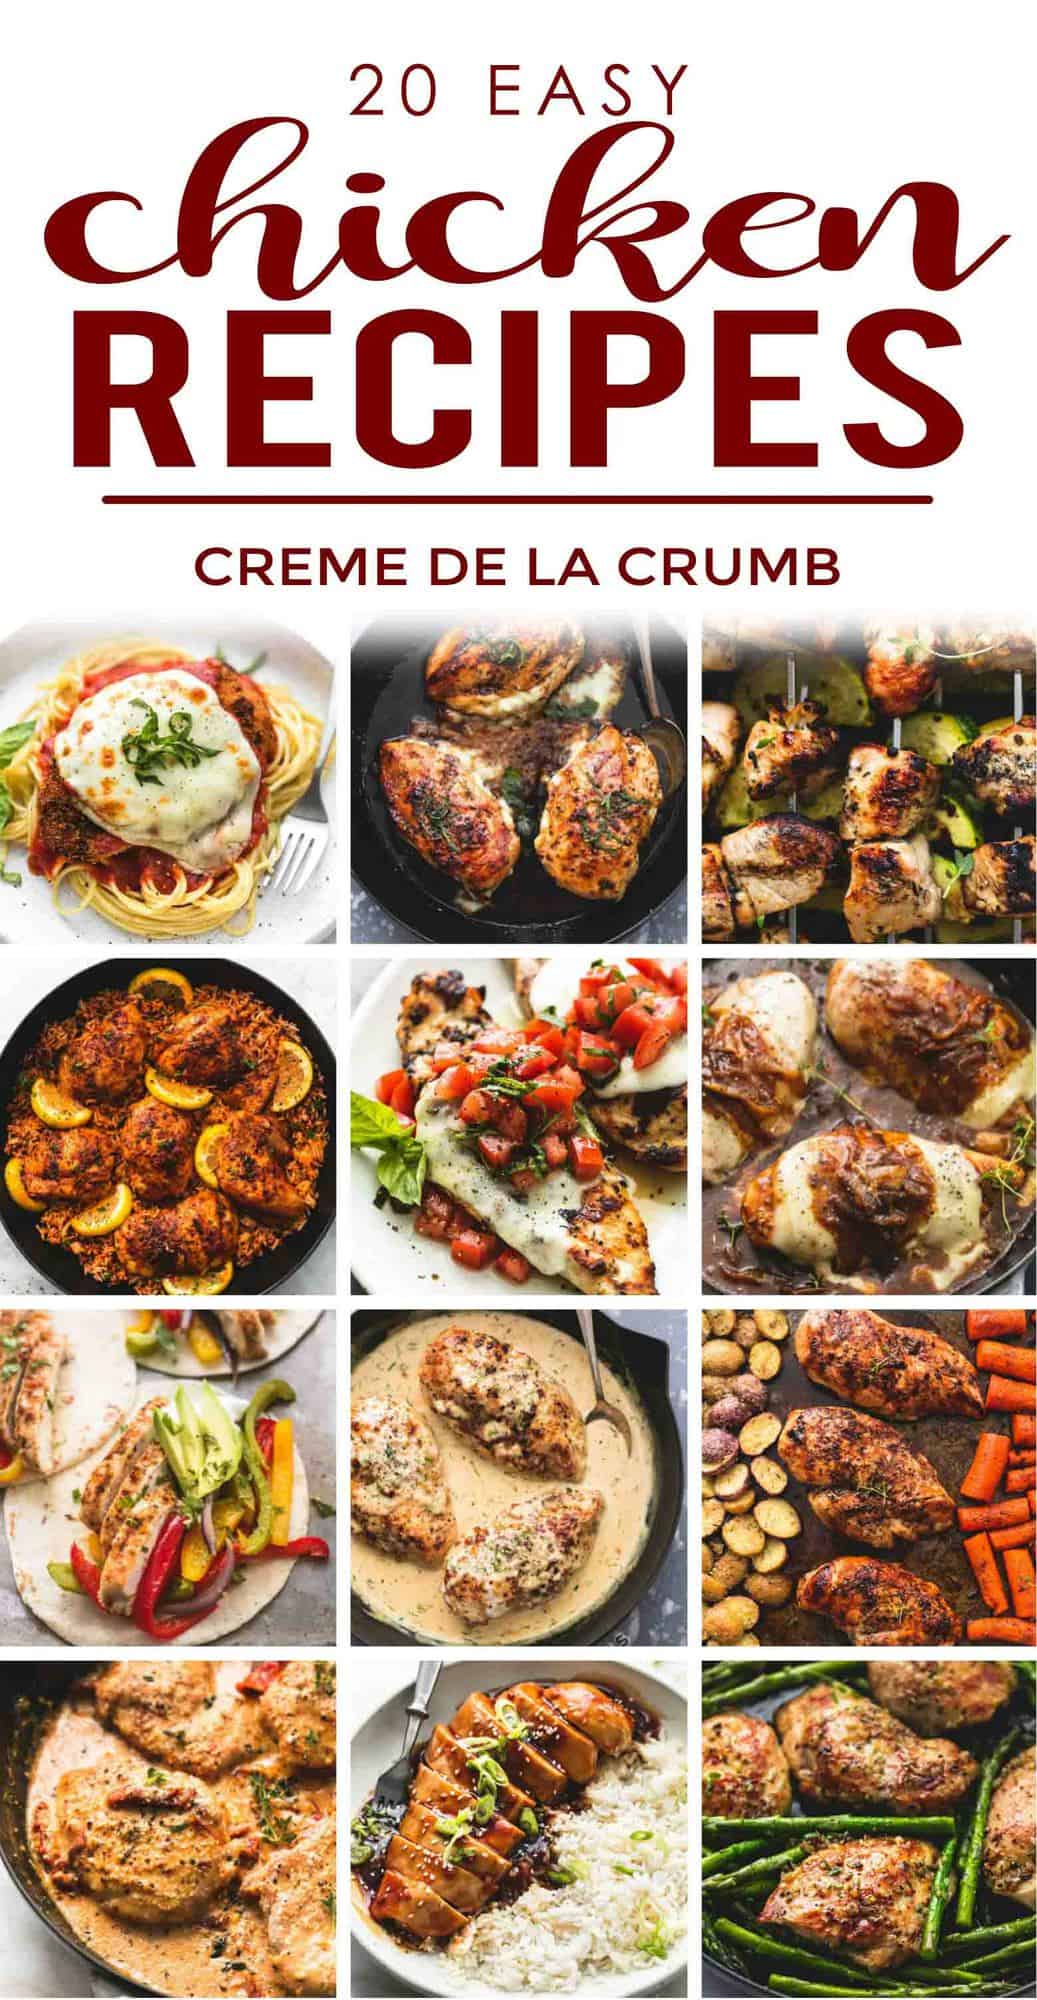 an image of the cover of "20 Easy Chicken Recipes" cookbook.